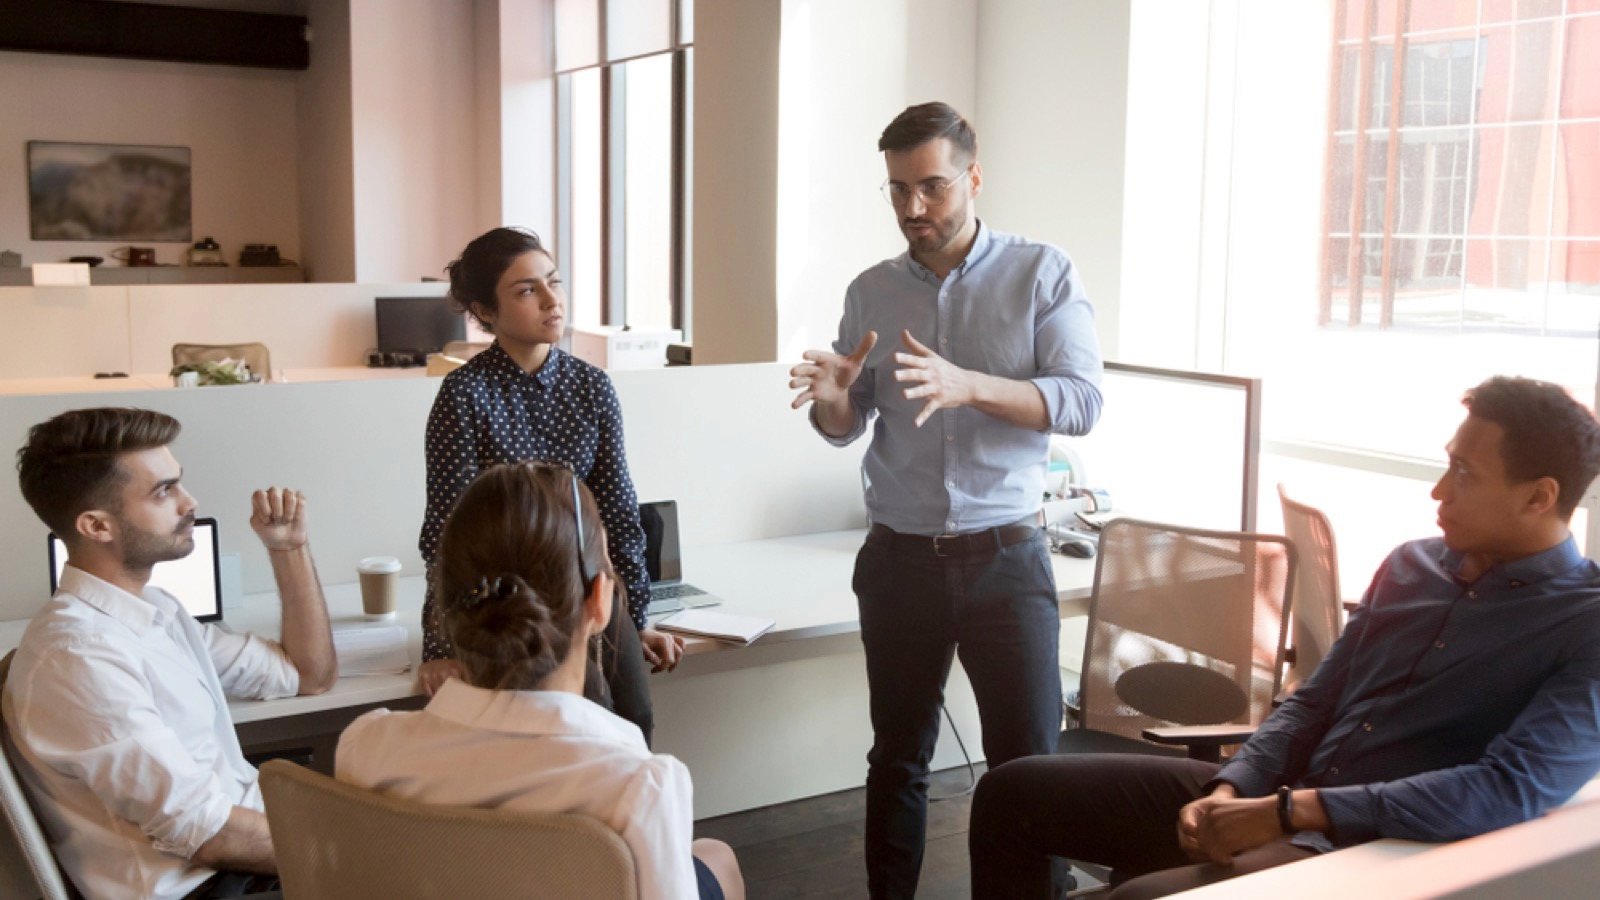 <p>Employees rarely work in isolation, and being part of a team means it’s important that everyone is on the same page. Coaching and mentoring are essential soft skills for leaders.</p><p>Managers need to learn how to effectively inspire and influence their team members. Clear, concise communication, strategic problem-solving, and creating a culture of accountability are hallmarks of a great coach or mentor.</p>